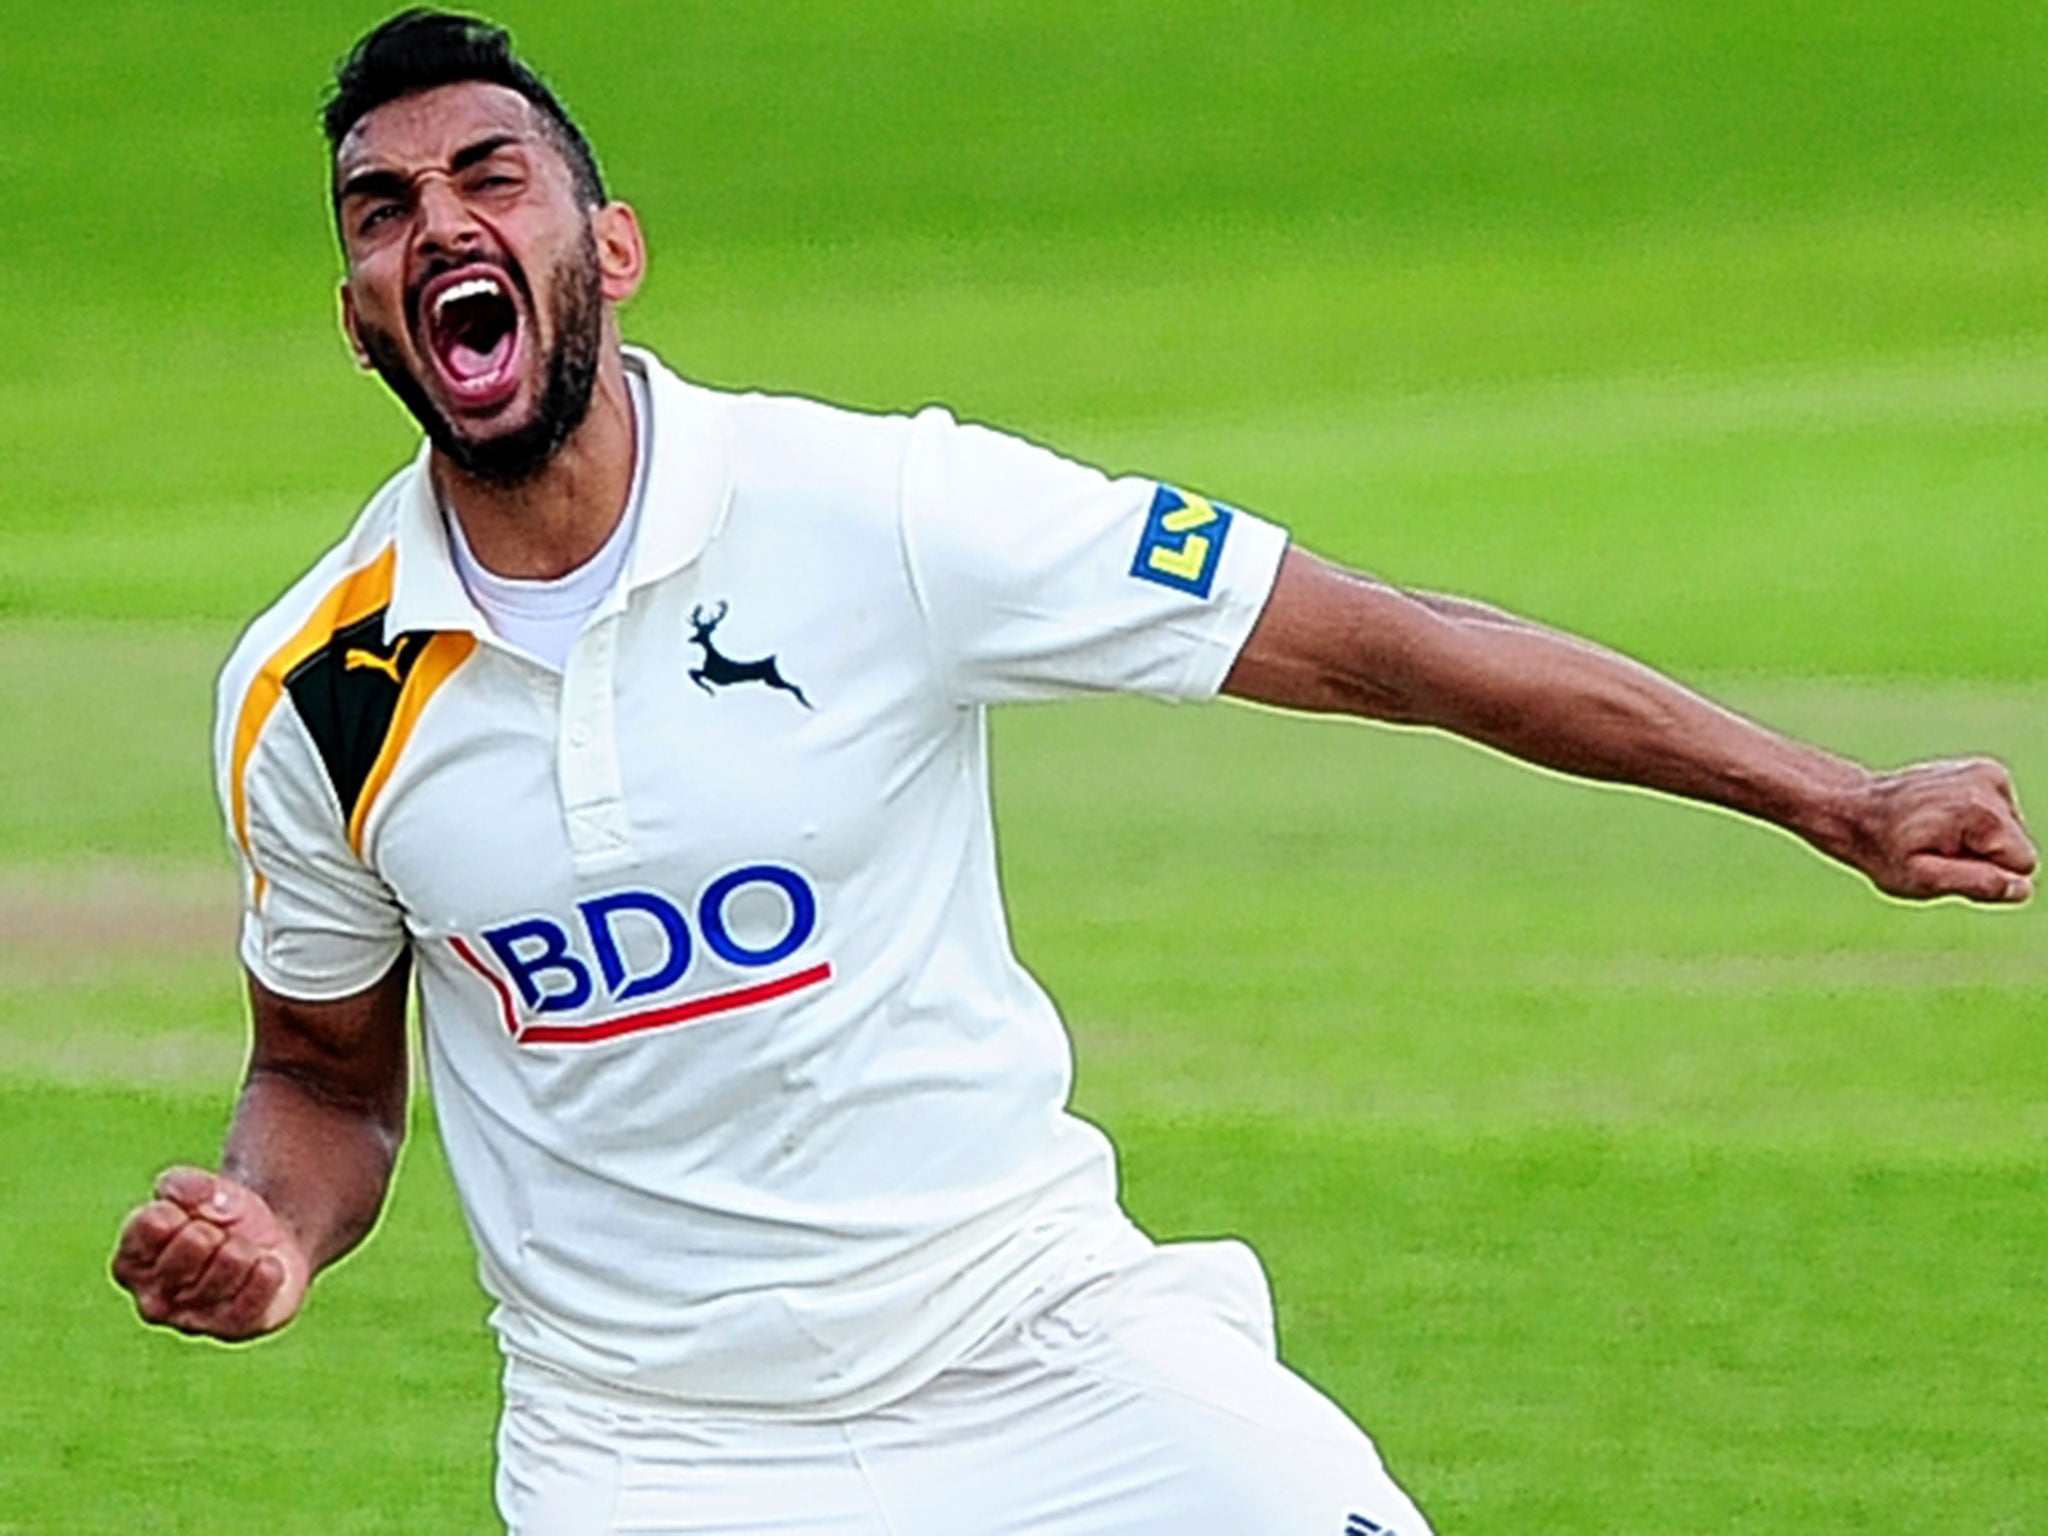 Ajmal Shahzad took two useful early wickets for Nottinghamshire